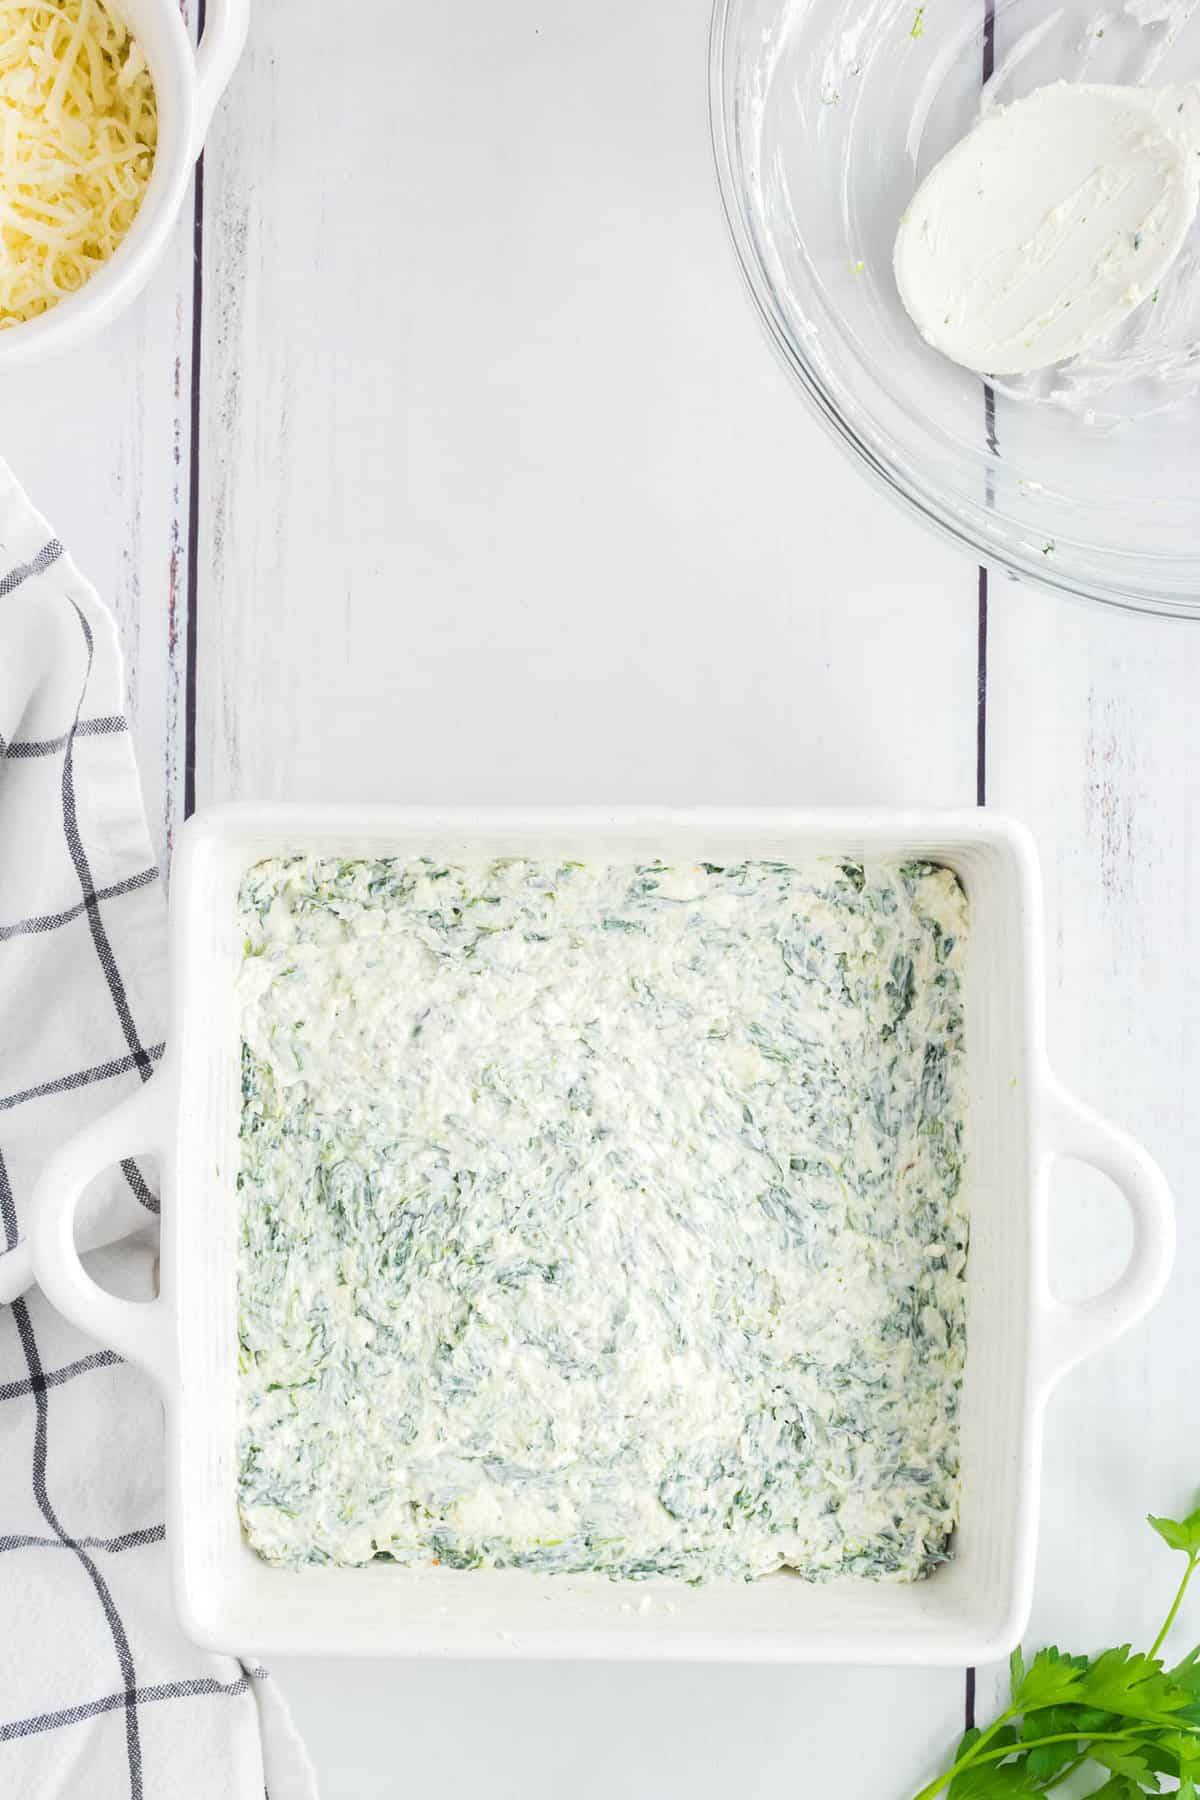 Spreading Blended Mixture in Baking Dish for Easy Spinach Dip